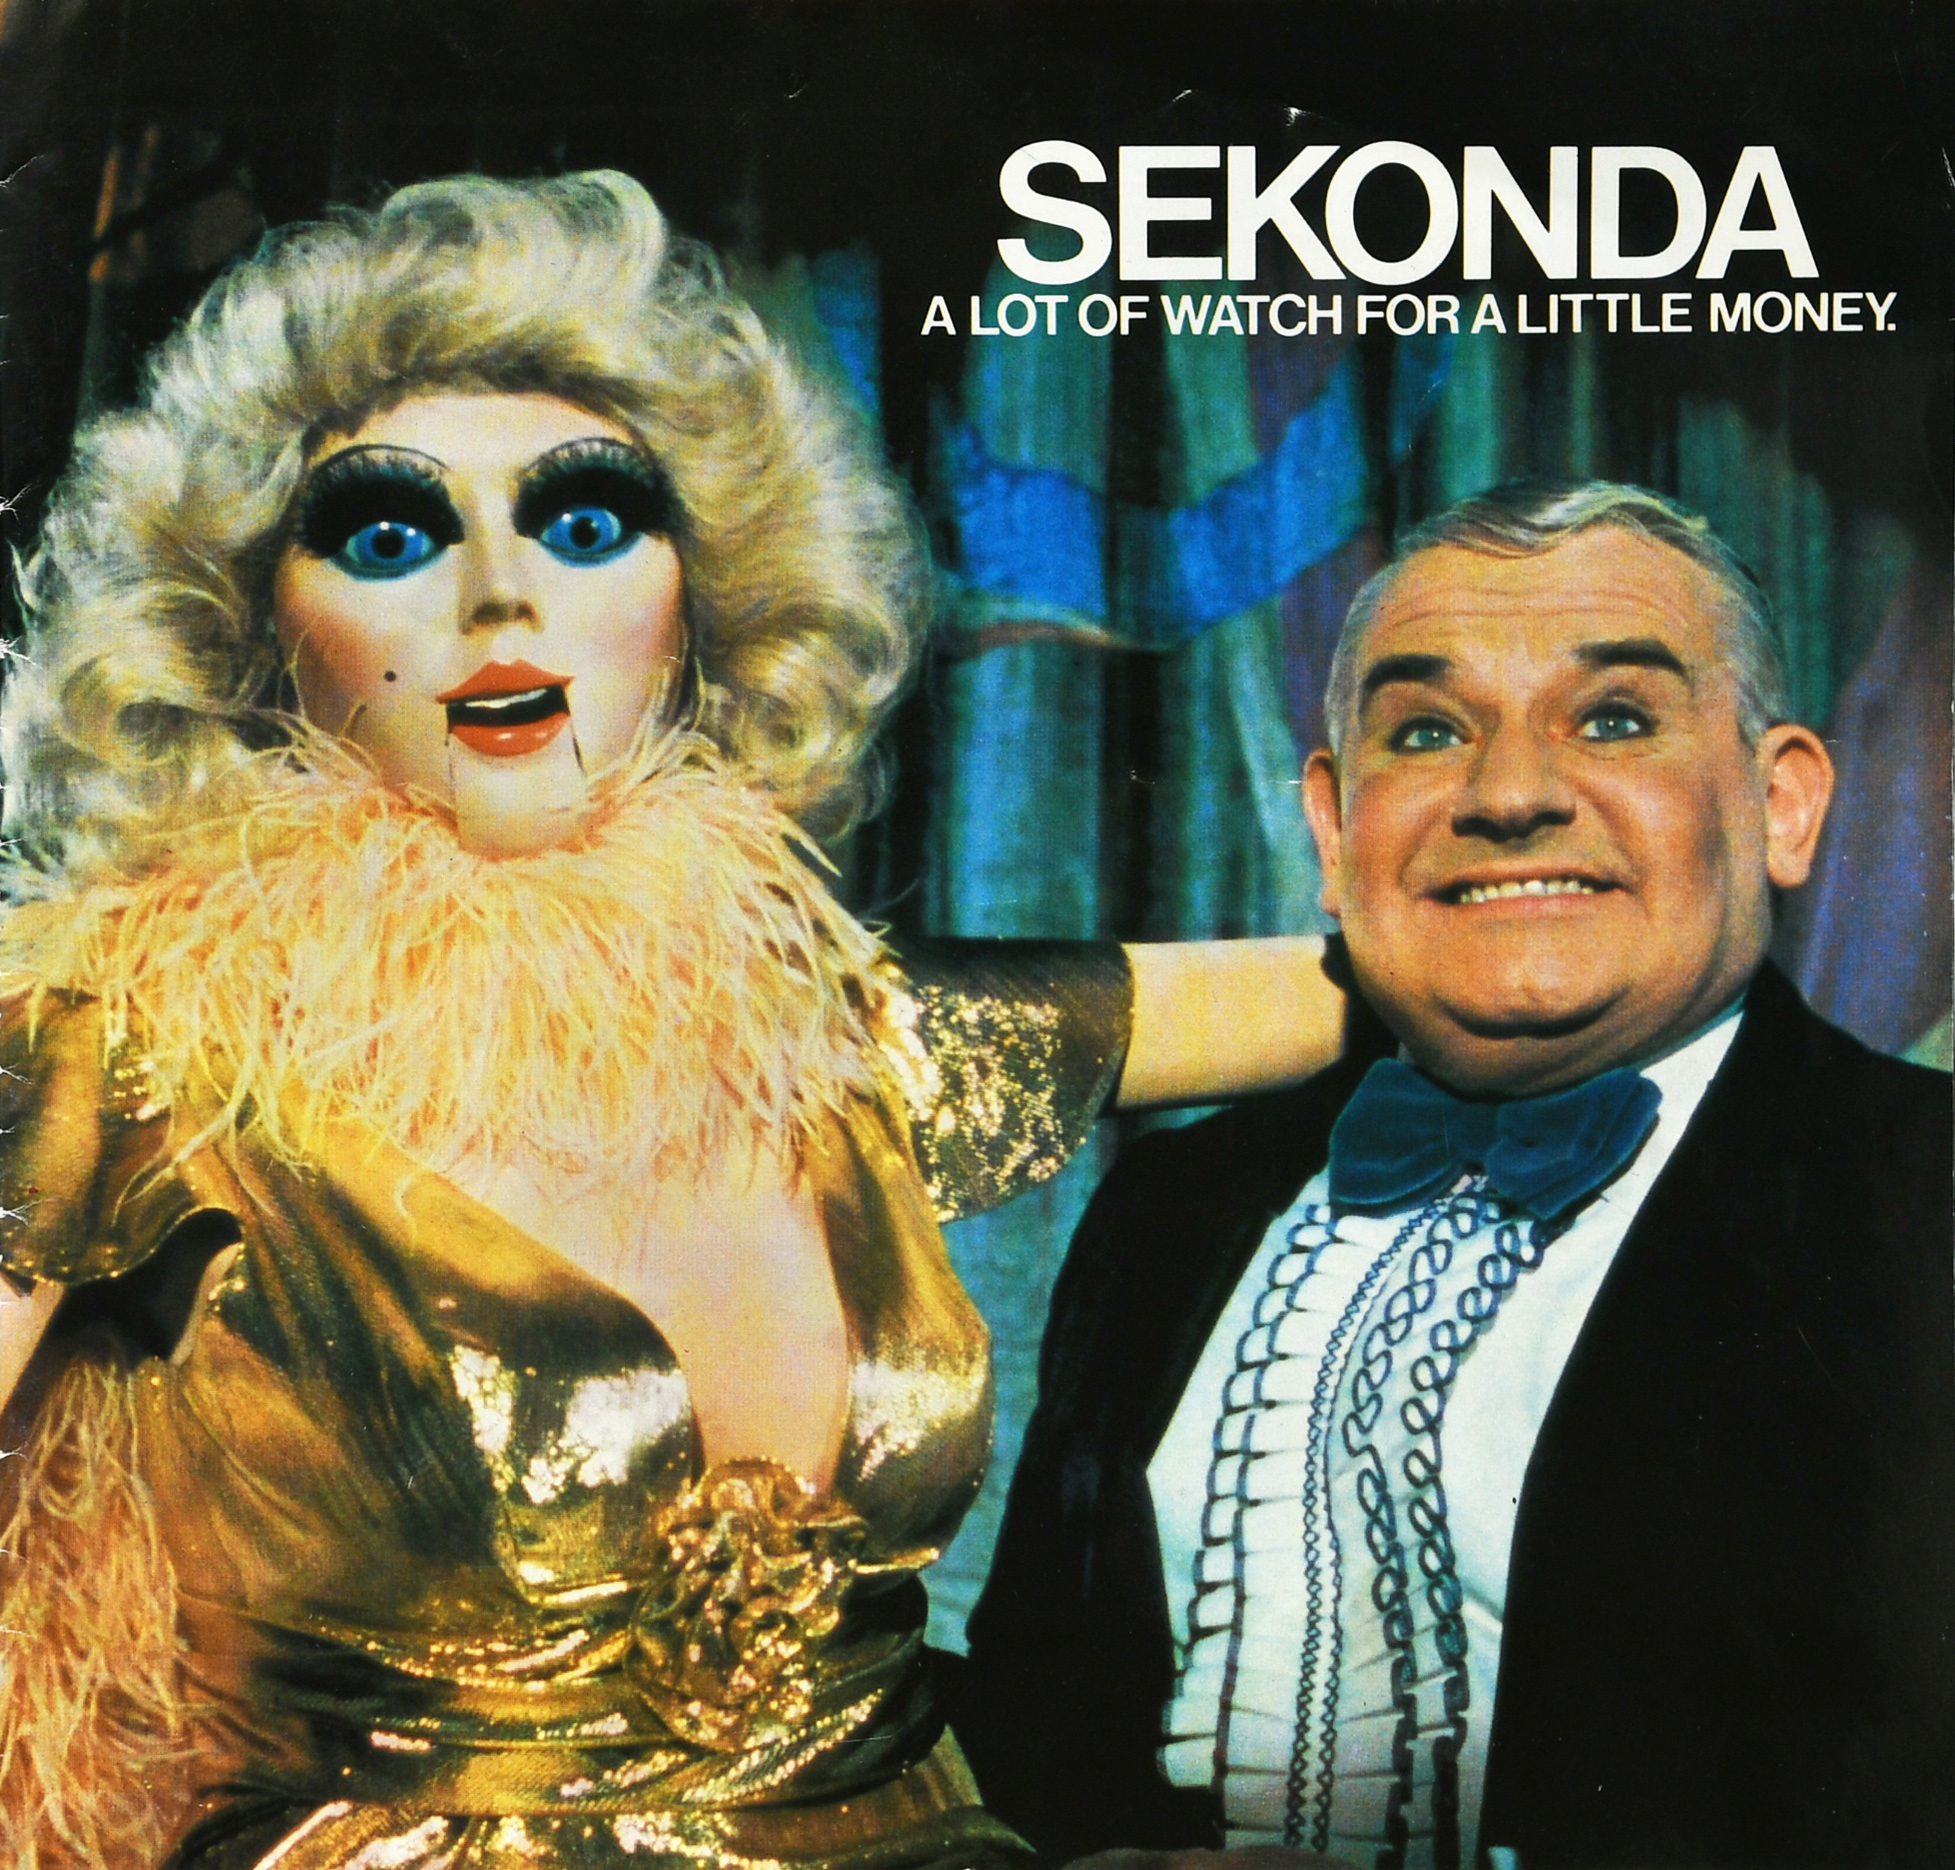 The ventriloquist's dummy is being sold together with a period Sekonda catalogue featuring Ronnie Barker and the dummy on the cover. (Cheffins/ PA)